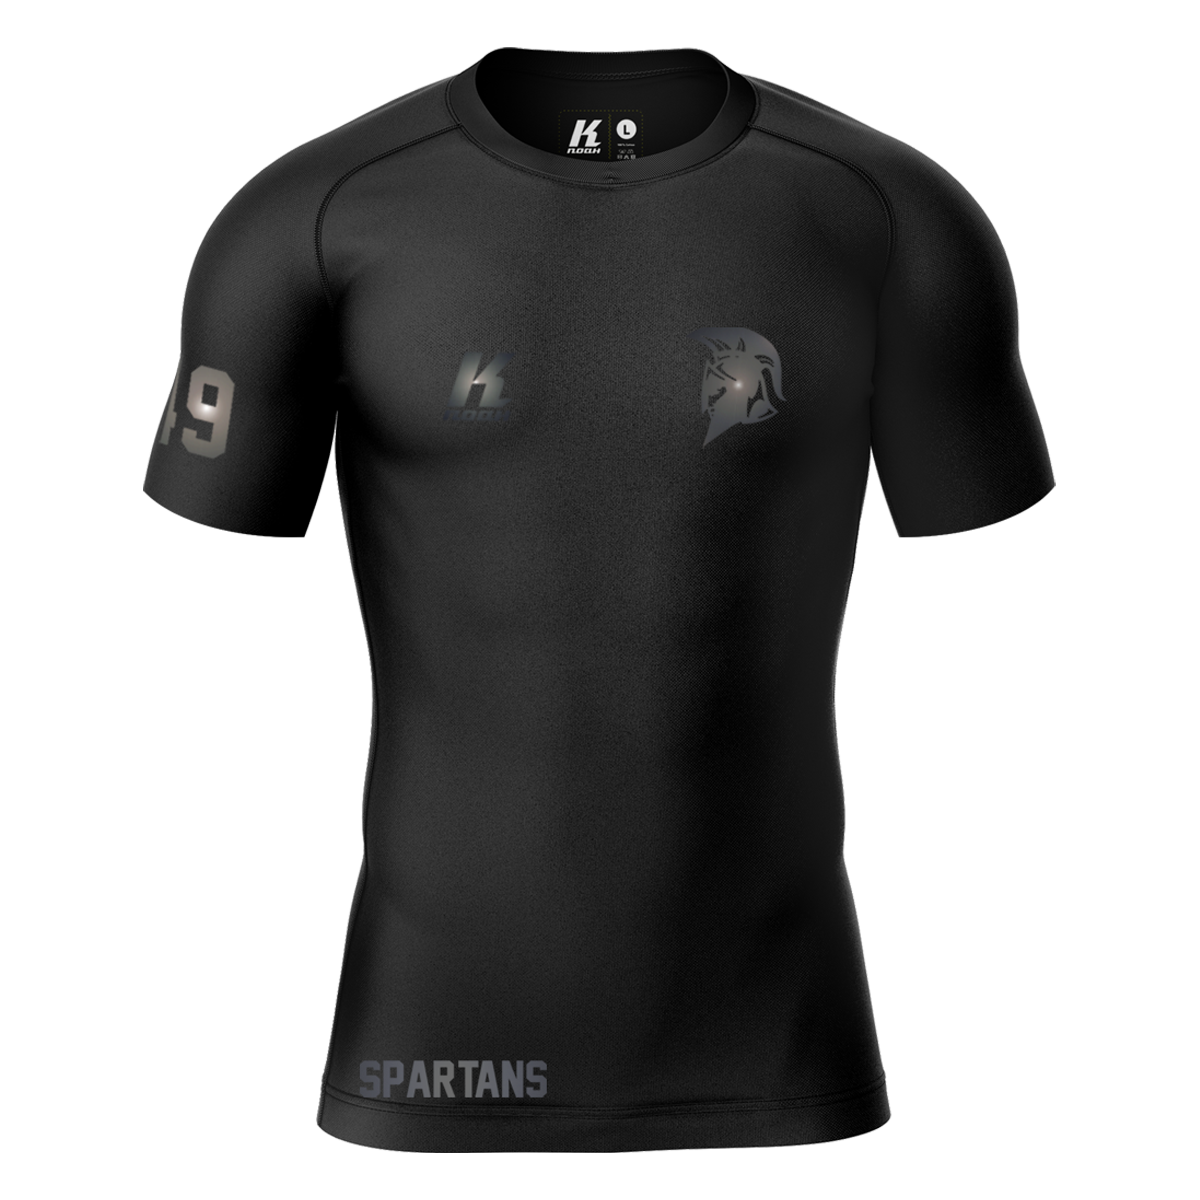 Spartans "Blackline" K.Tech Compression Shortsleeve Shirt with Playernumber/Initials